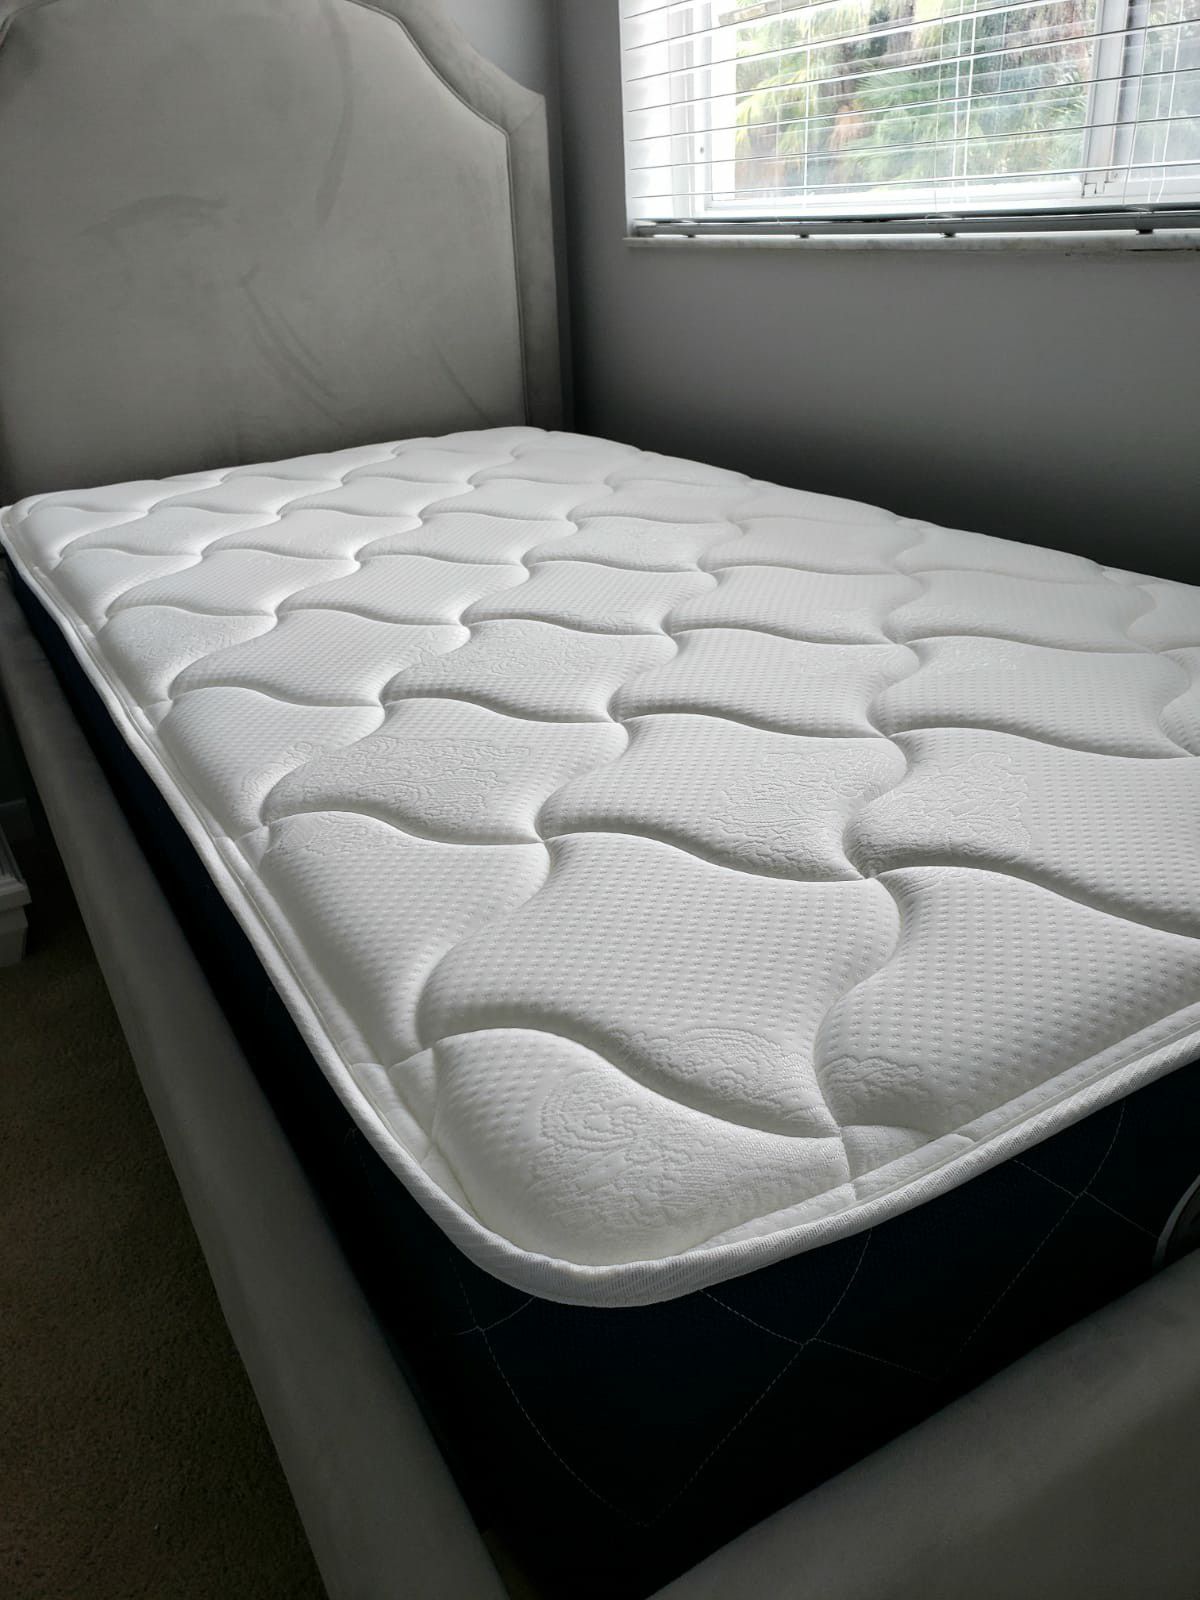 New TWIN size mattress & BOX spring. Bed frame not included on offer